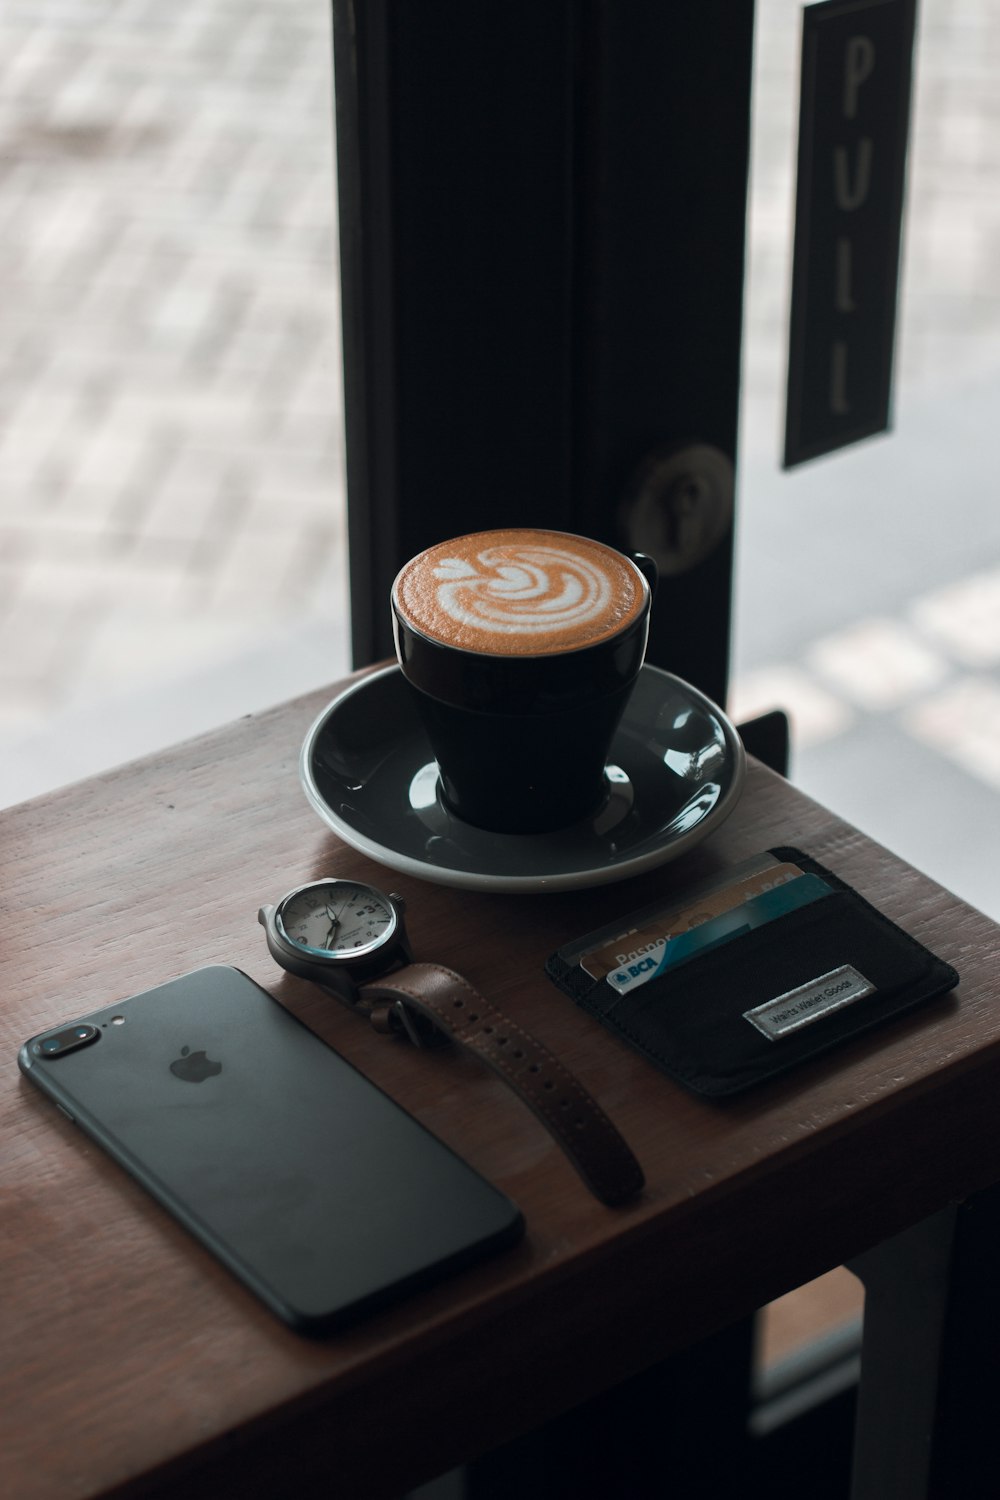 black ceramic teacup with coffee latte on saucer beside black iPhone 7 Plus on brown wooden table